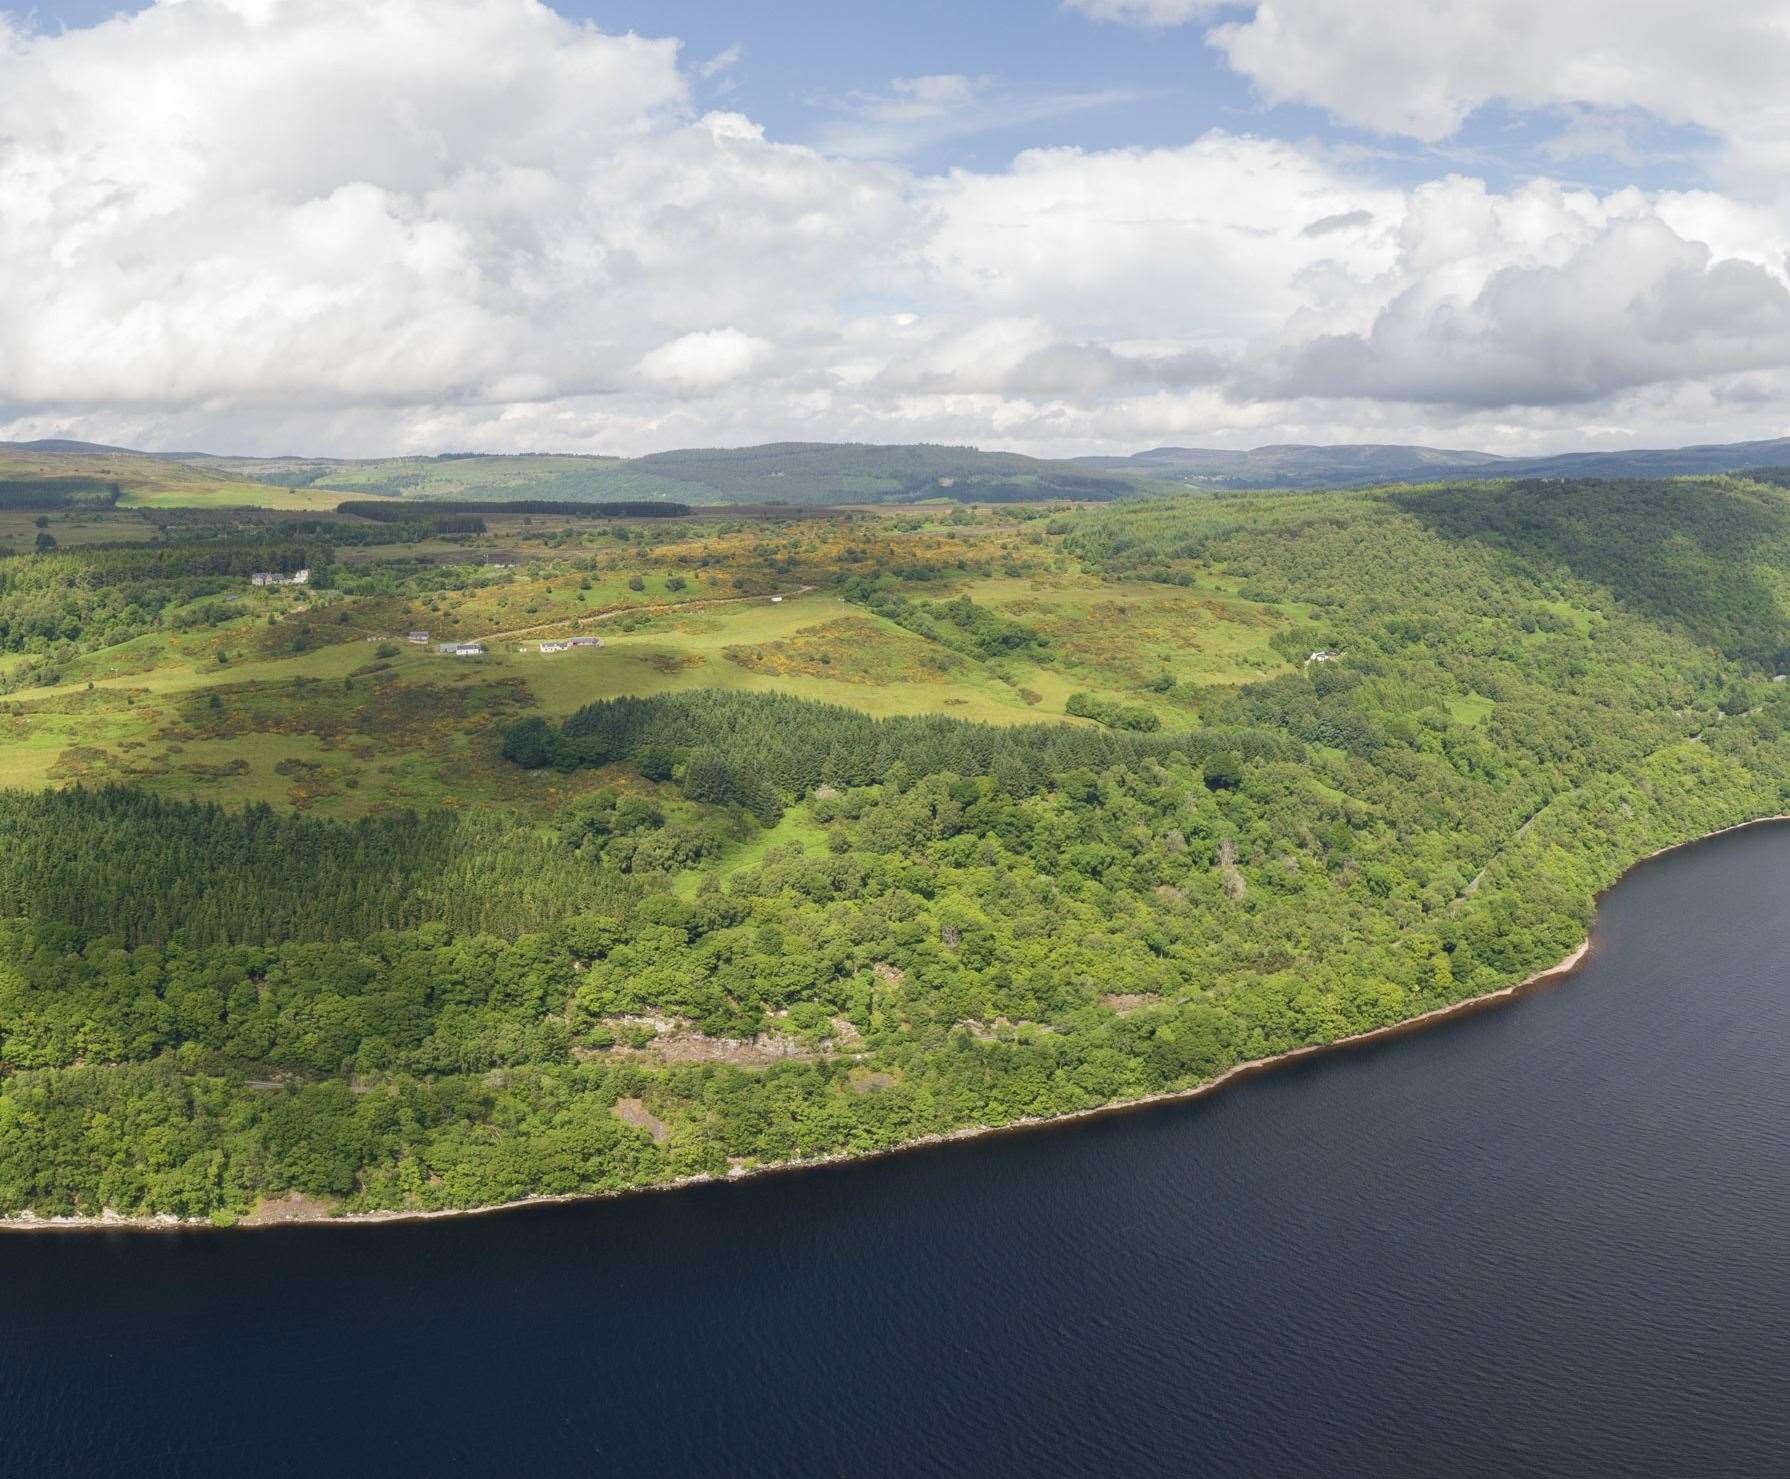 The Bunloit Rewilding Project near Loch Ness aims to boost nature recovery and community prosperity through rewilding.